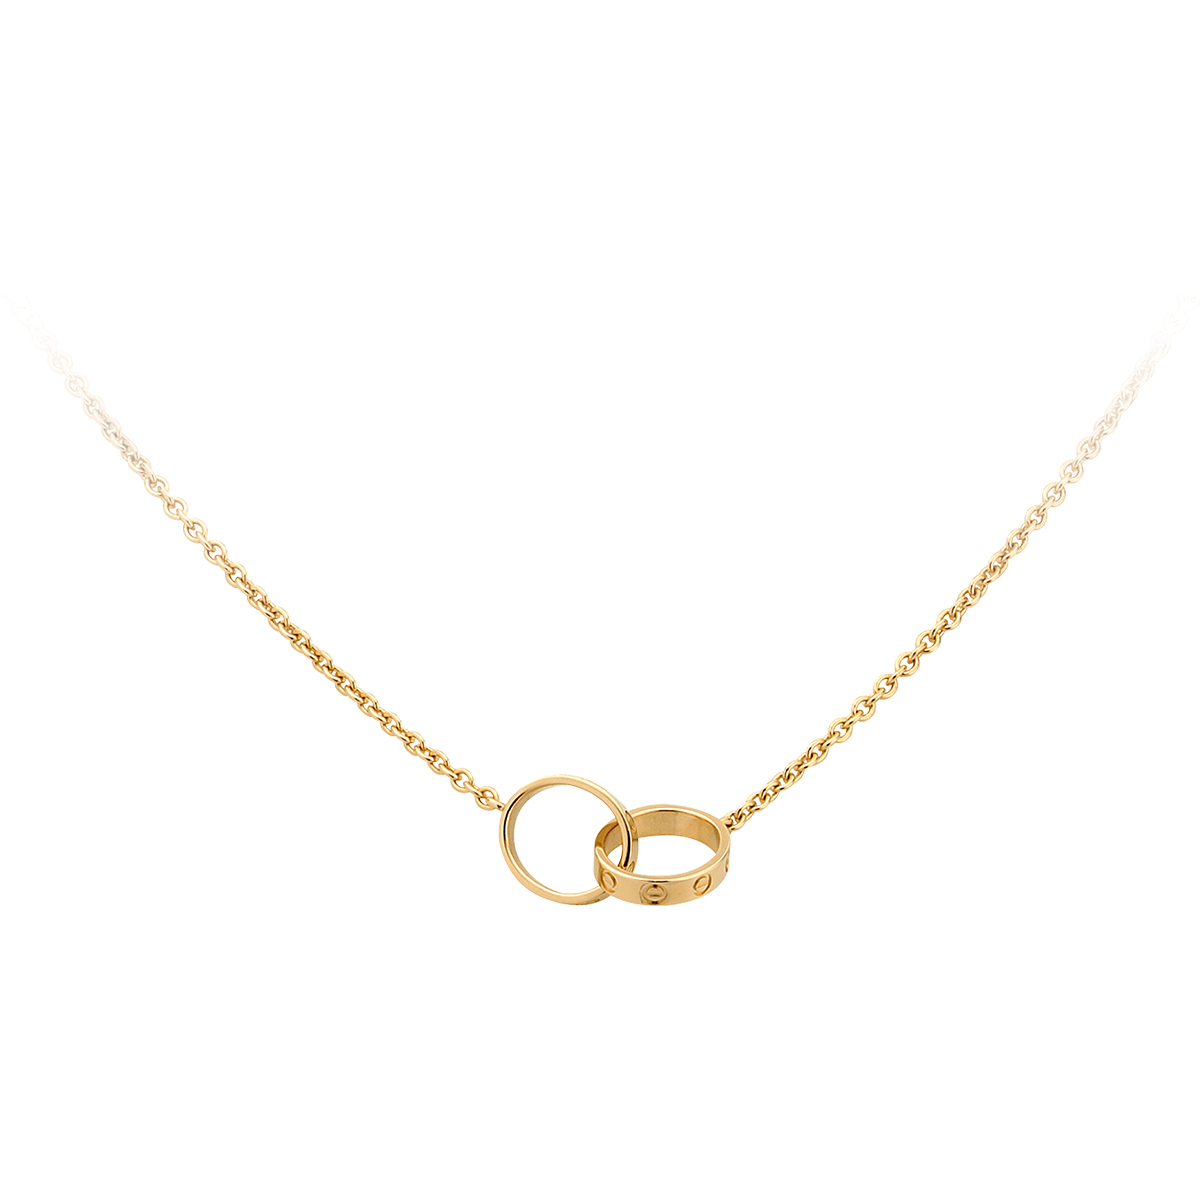 Love Necklace, $2370